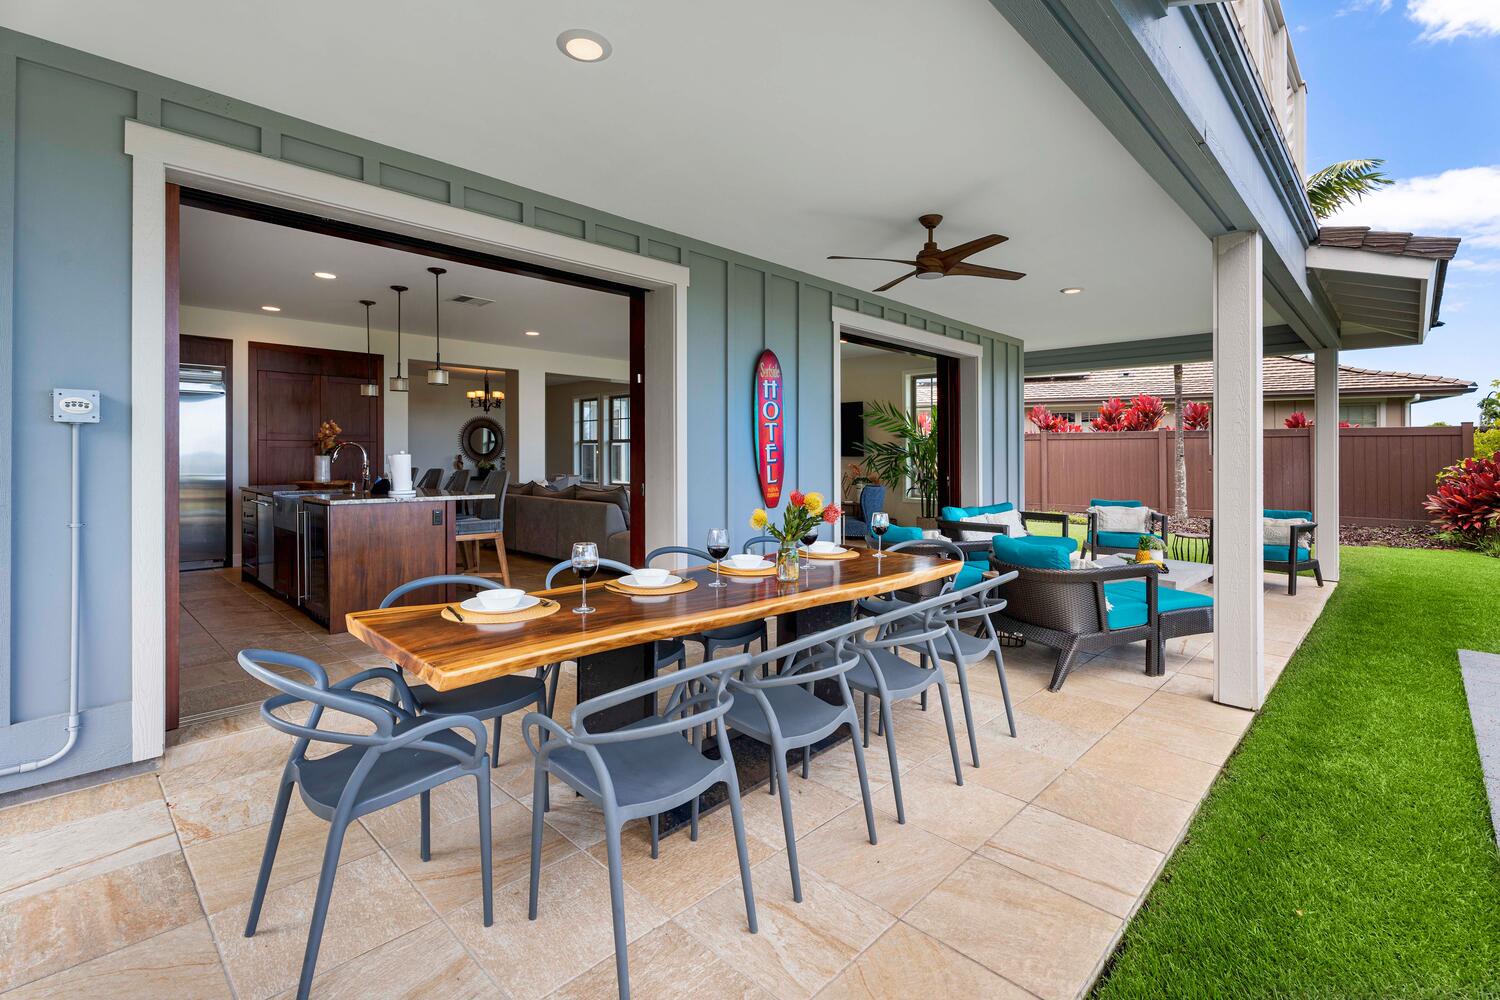 Kailua-Kona Vacation Rentals, Holua Kai #26 - Host memorable gatherings in this open and inviting outdoor dining space, seamlessly connected to the kitchen for ultimate convenience and style.